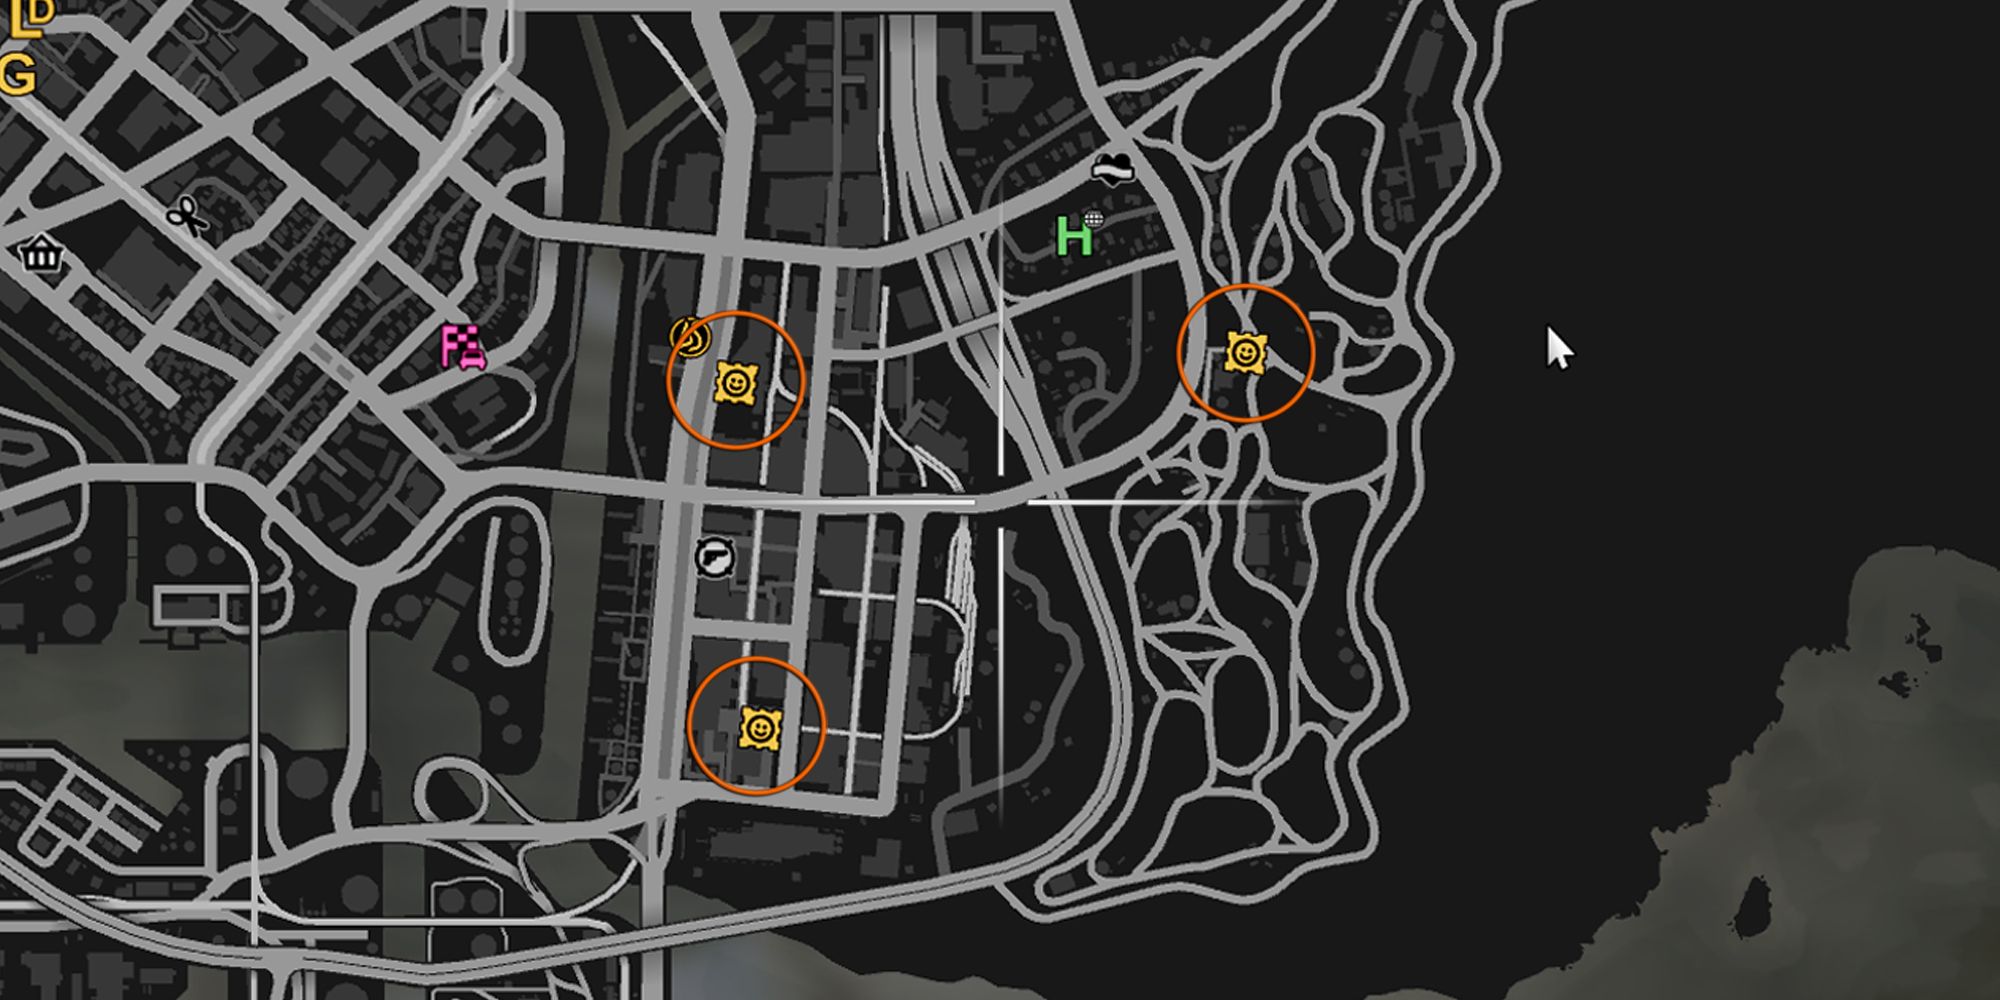 The image shows the Grand Theft Auto Online map with three yellow squares with smiley faces in the center.  These are highlighted with an orange circle.